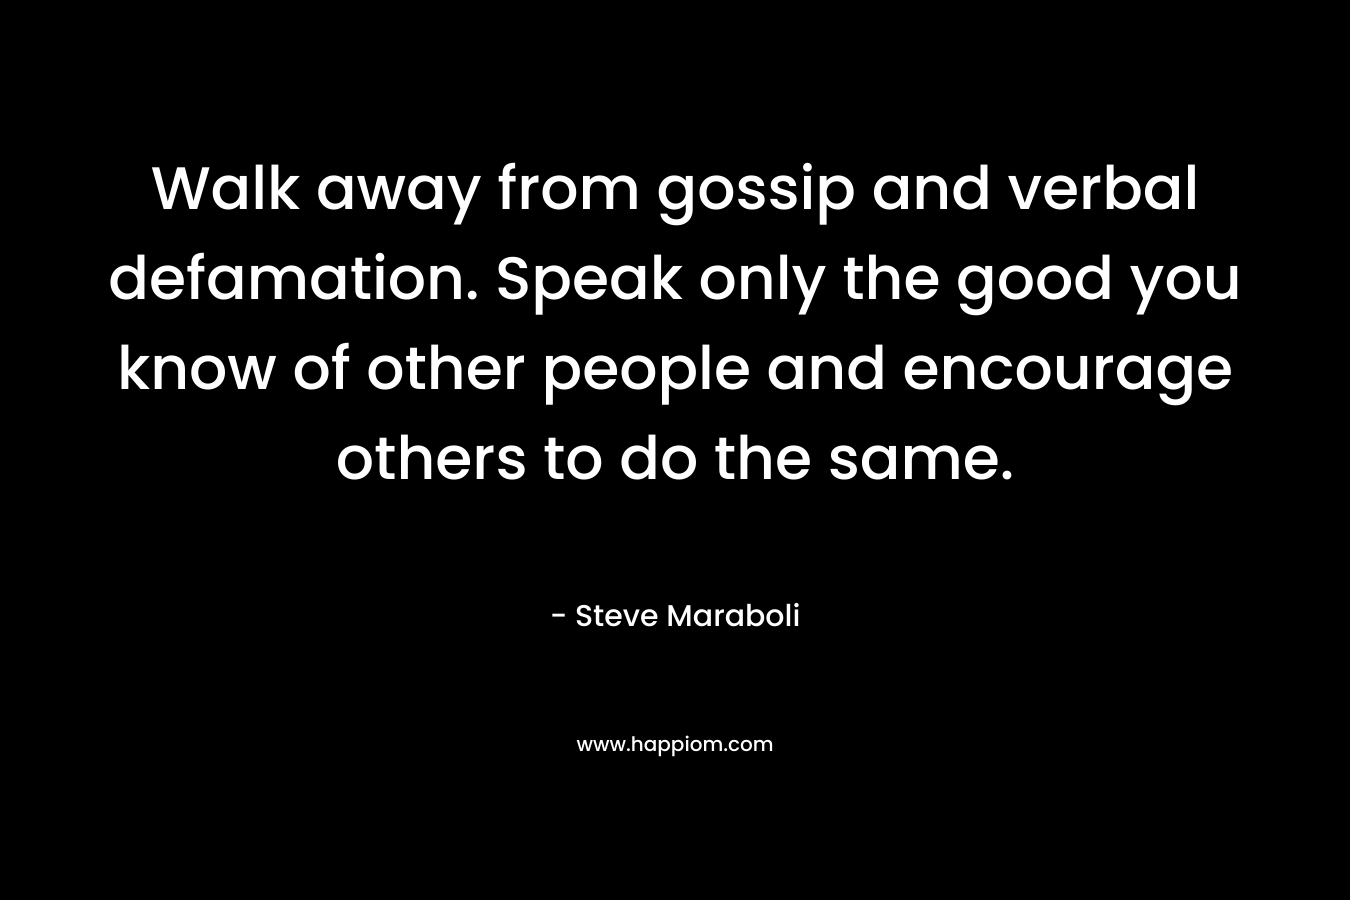 Walk away from gossip and verbal defamation. Speak only the good you know of other people and encourage others to do the same. – Steve Maraboli